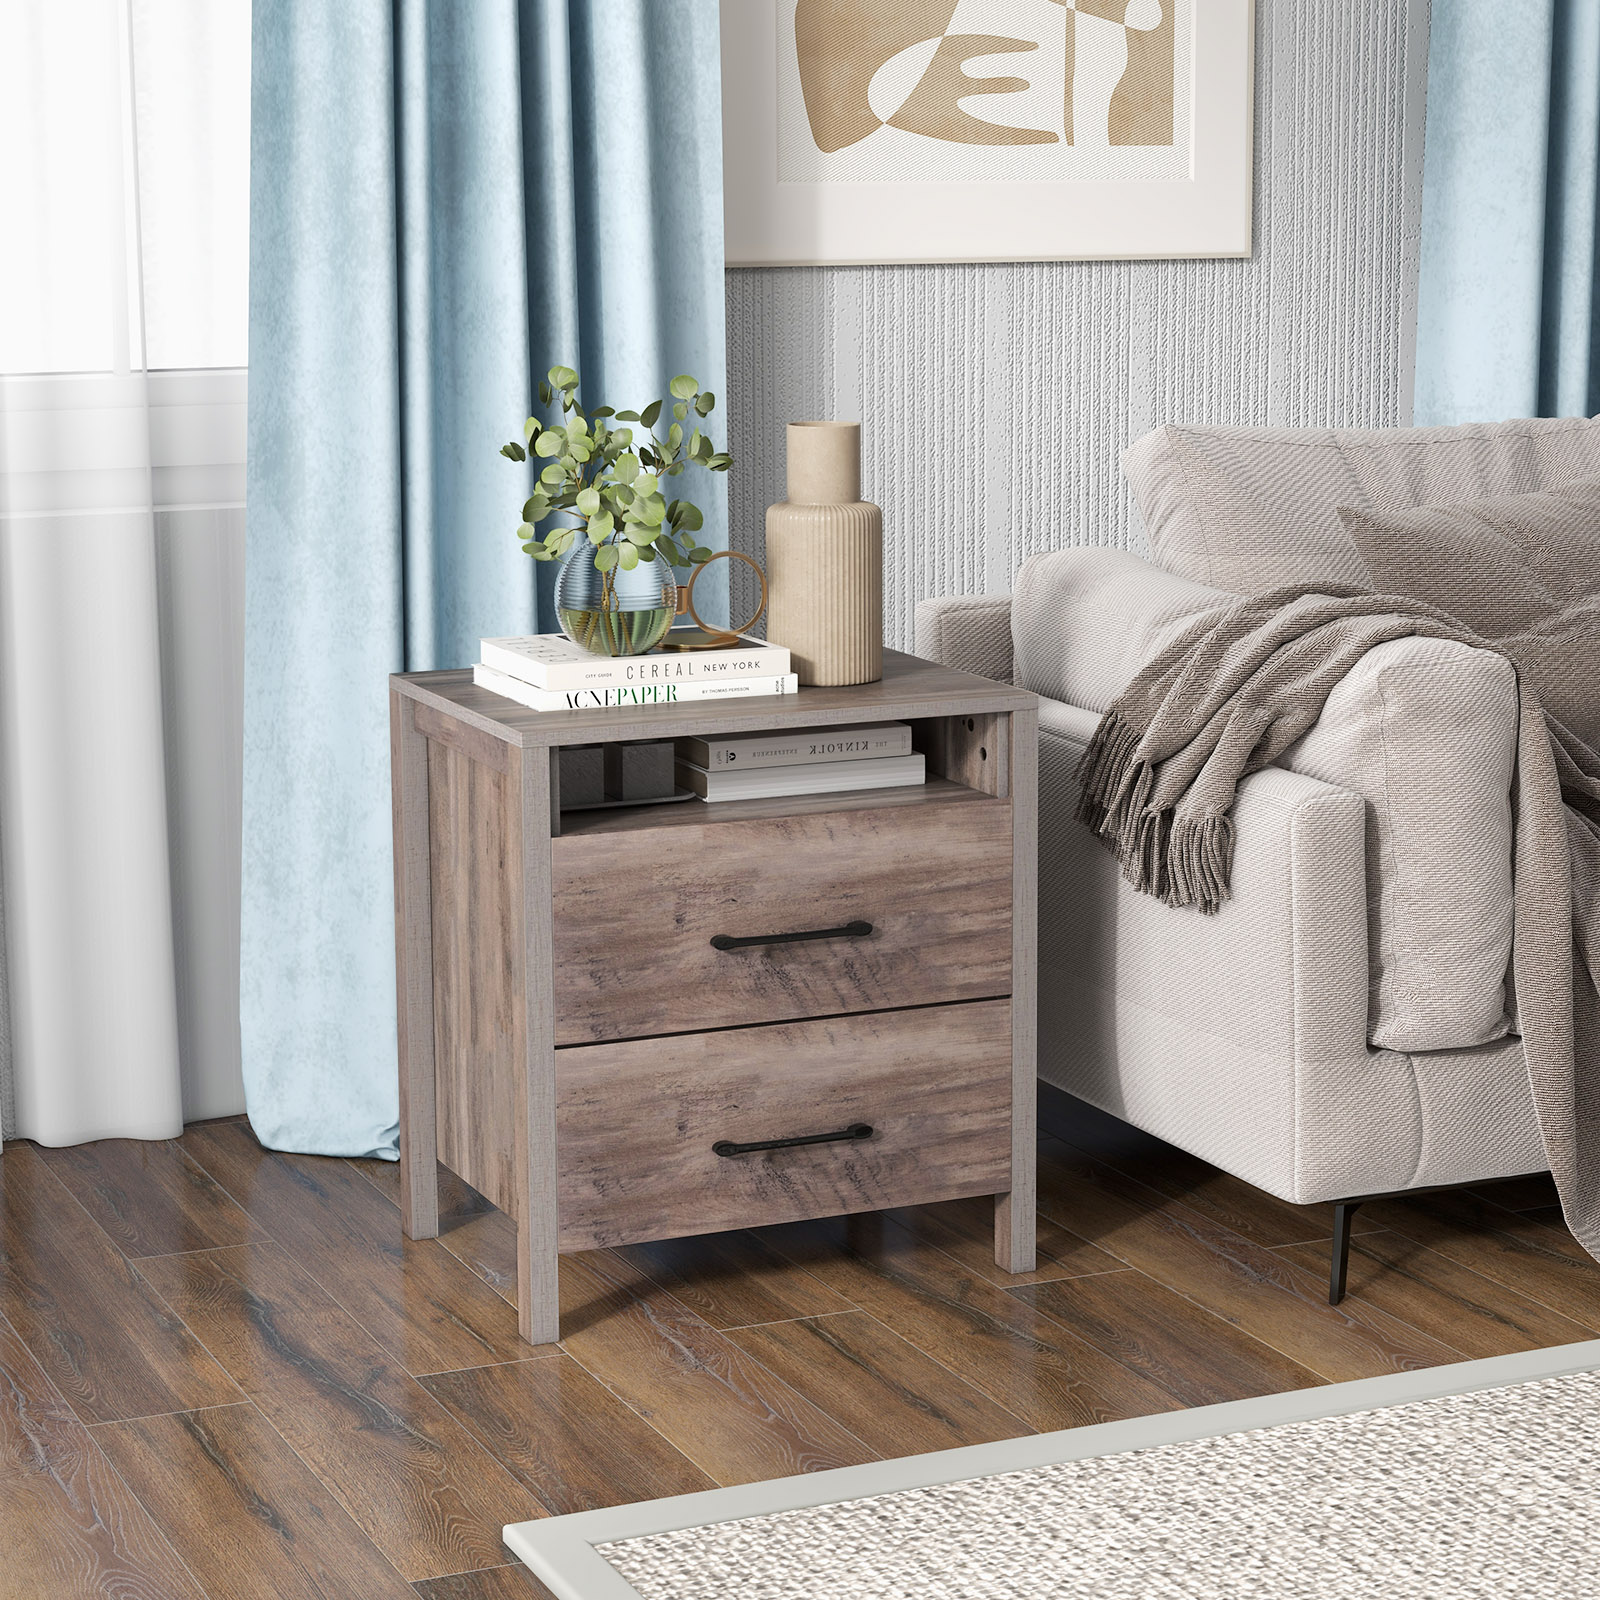 Farmhouse_Nightstand_Bed_Side_Table_with_2_Drawers-7.jpg